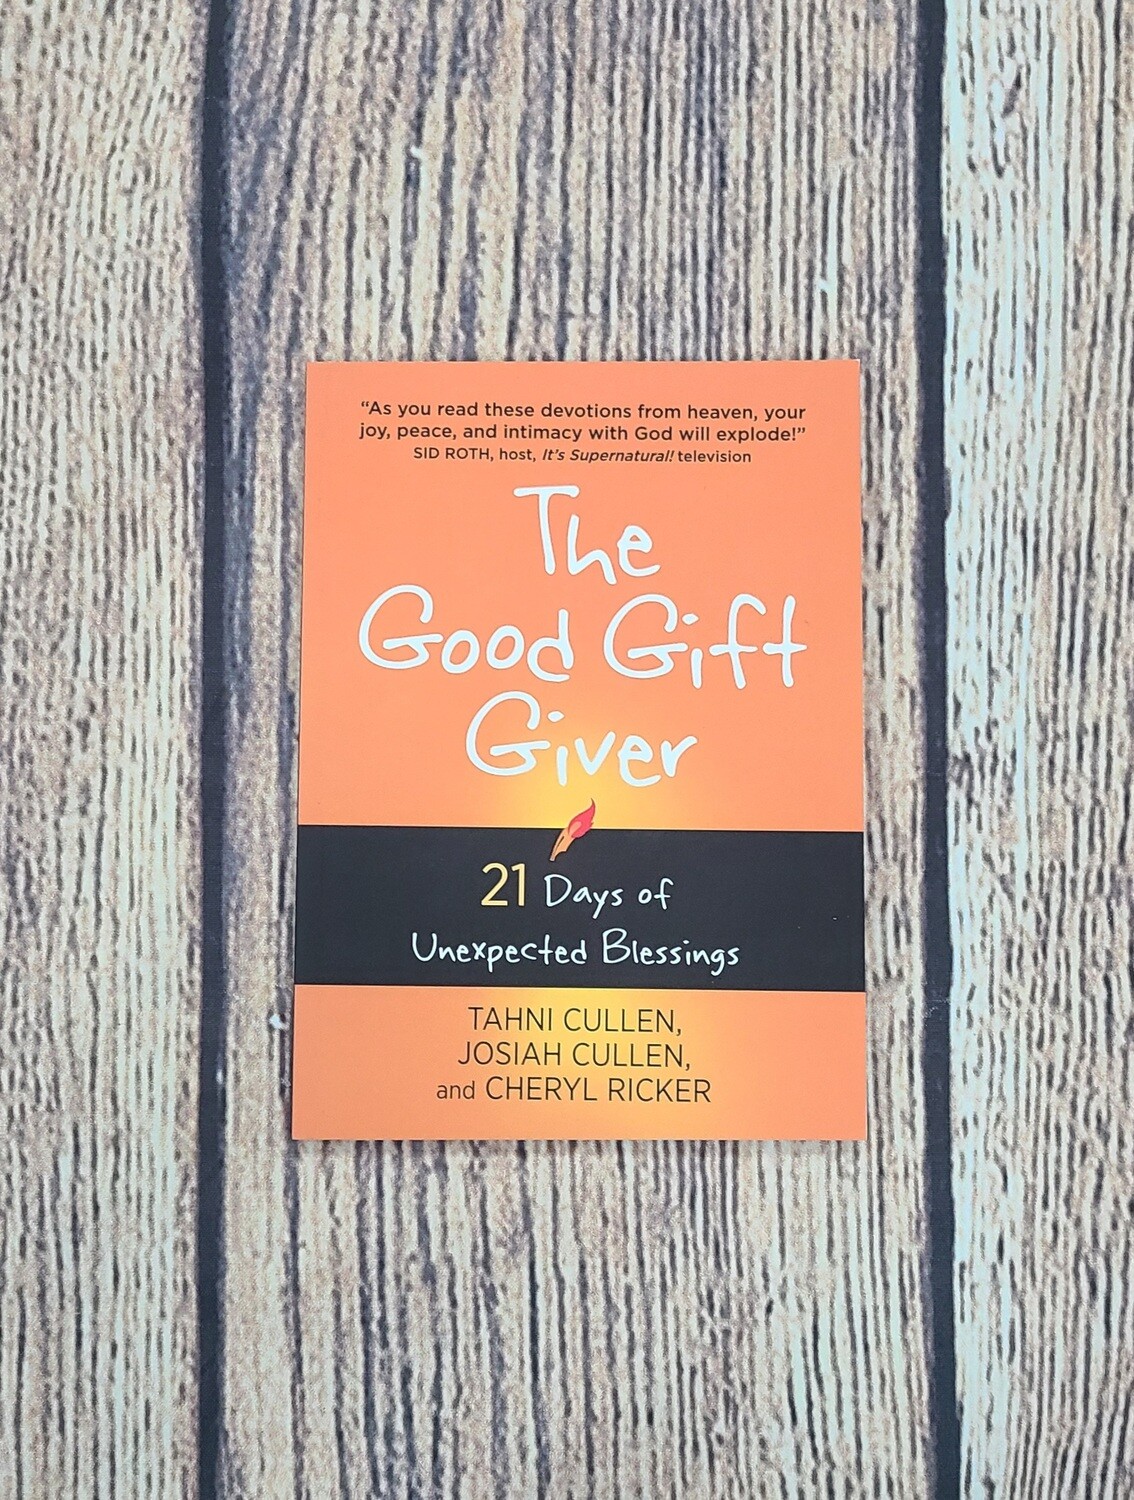 The Good Gift Giver: 21 Days of Unexpected Blessings by Tahni Cullen, Josiah Cullen, and Cheryl Ricker